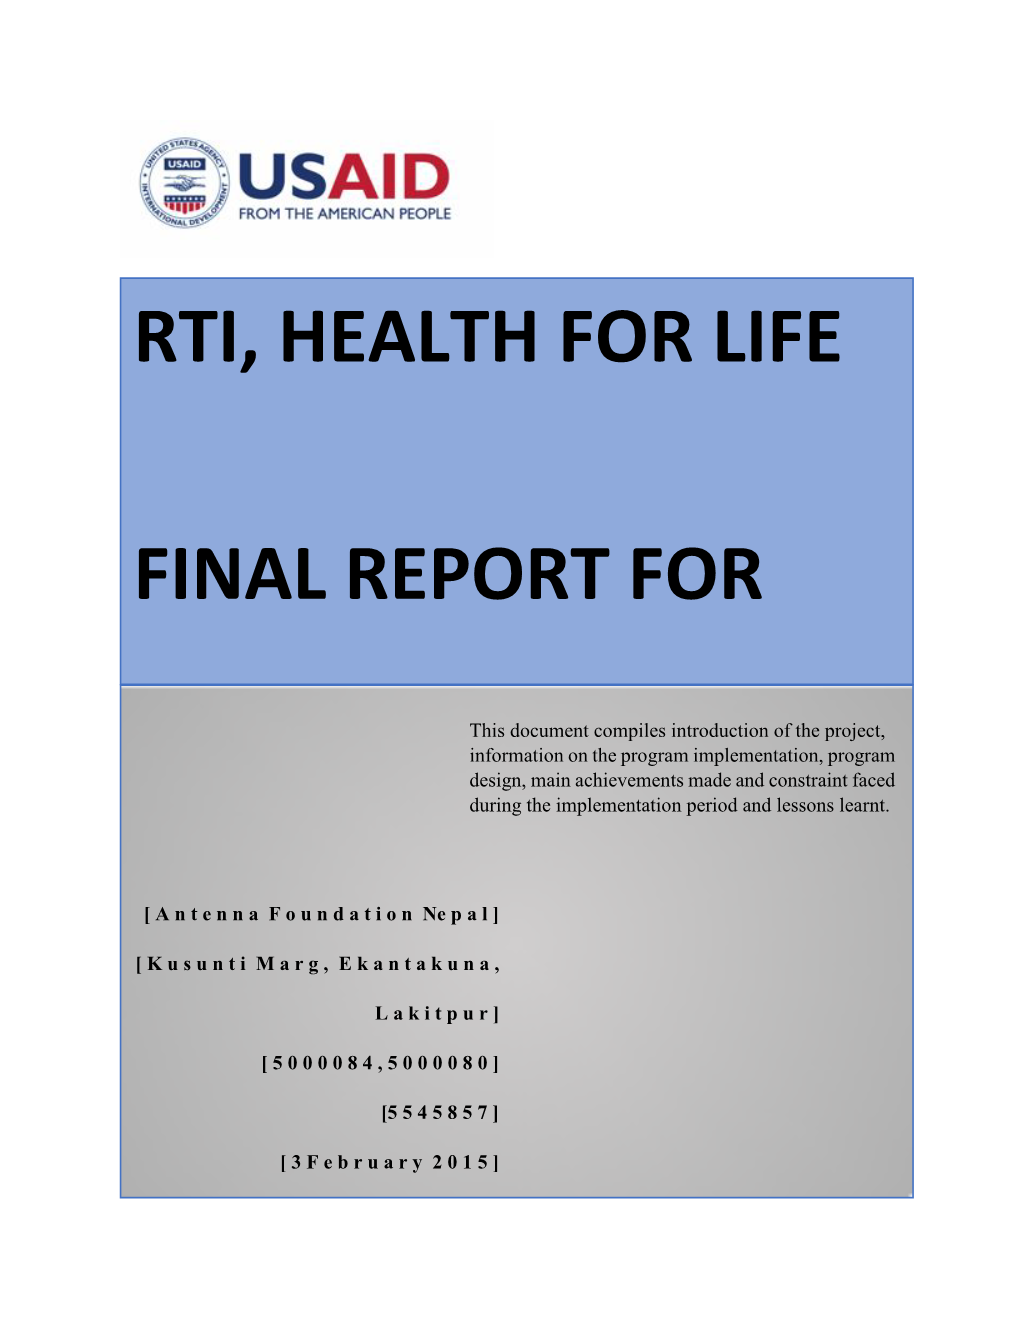 Final Report for Rti, Health for Life